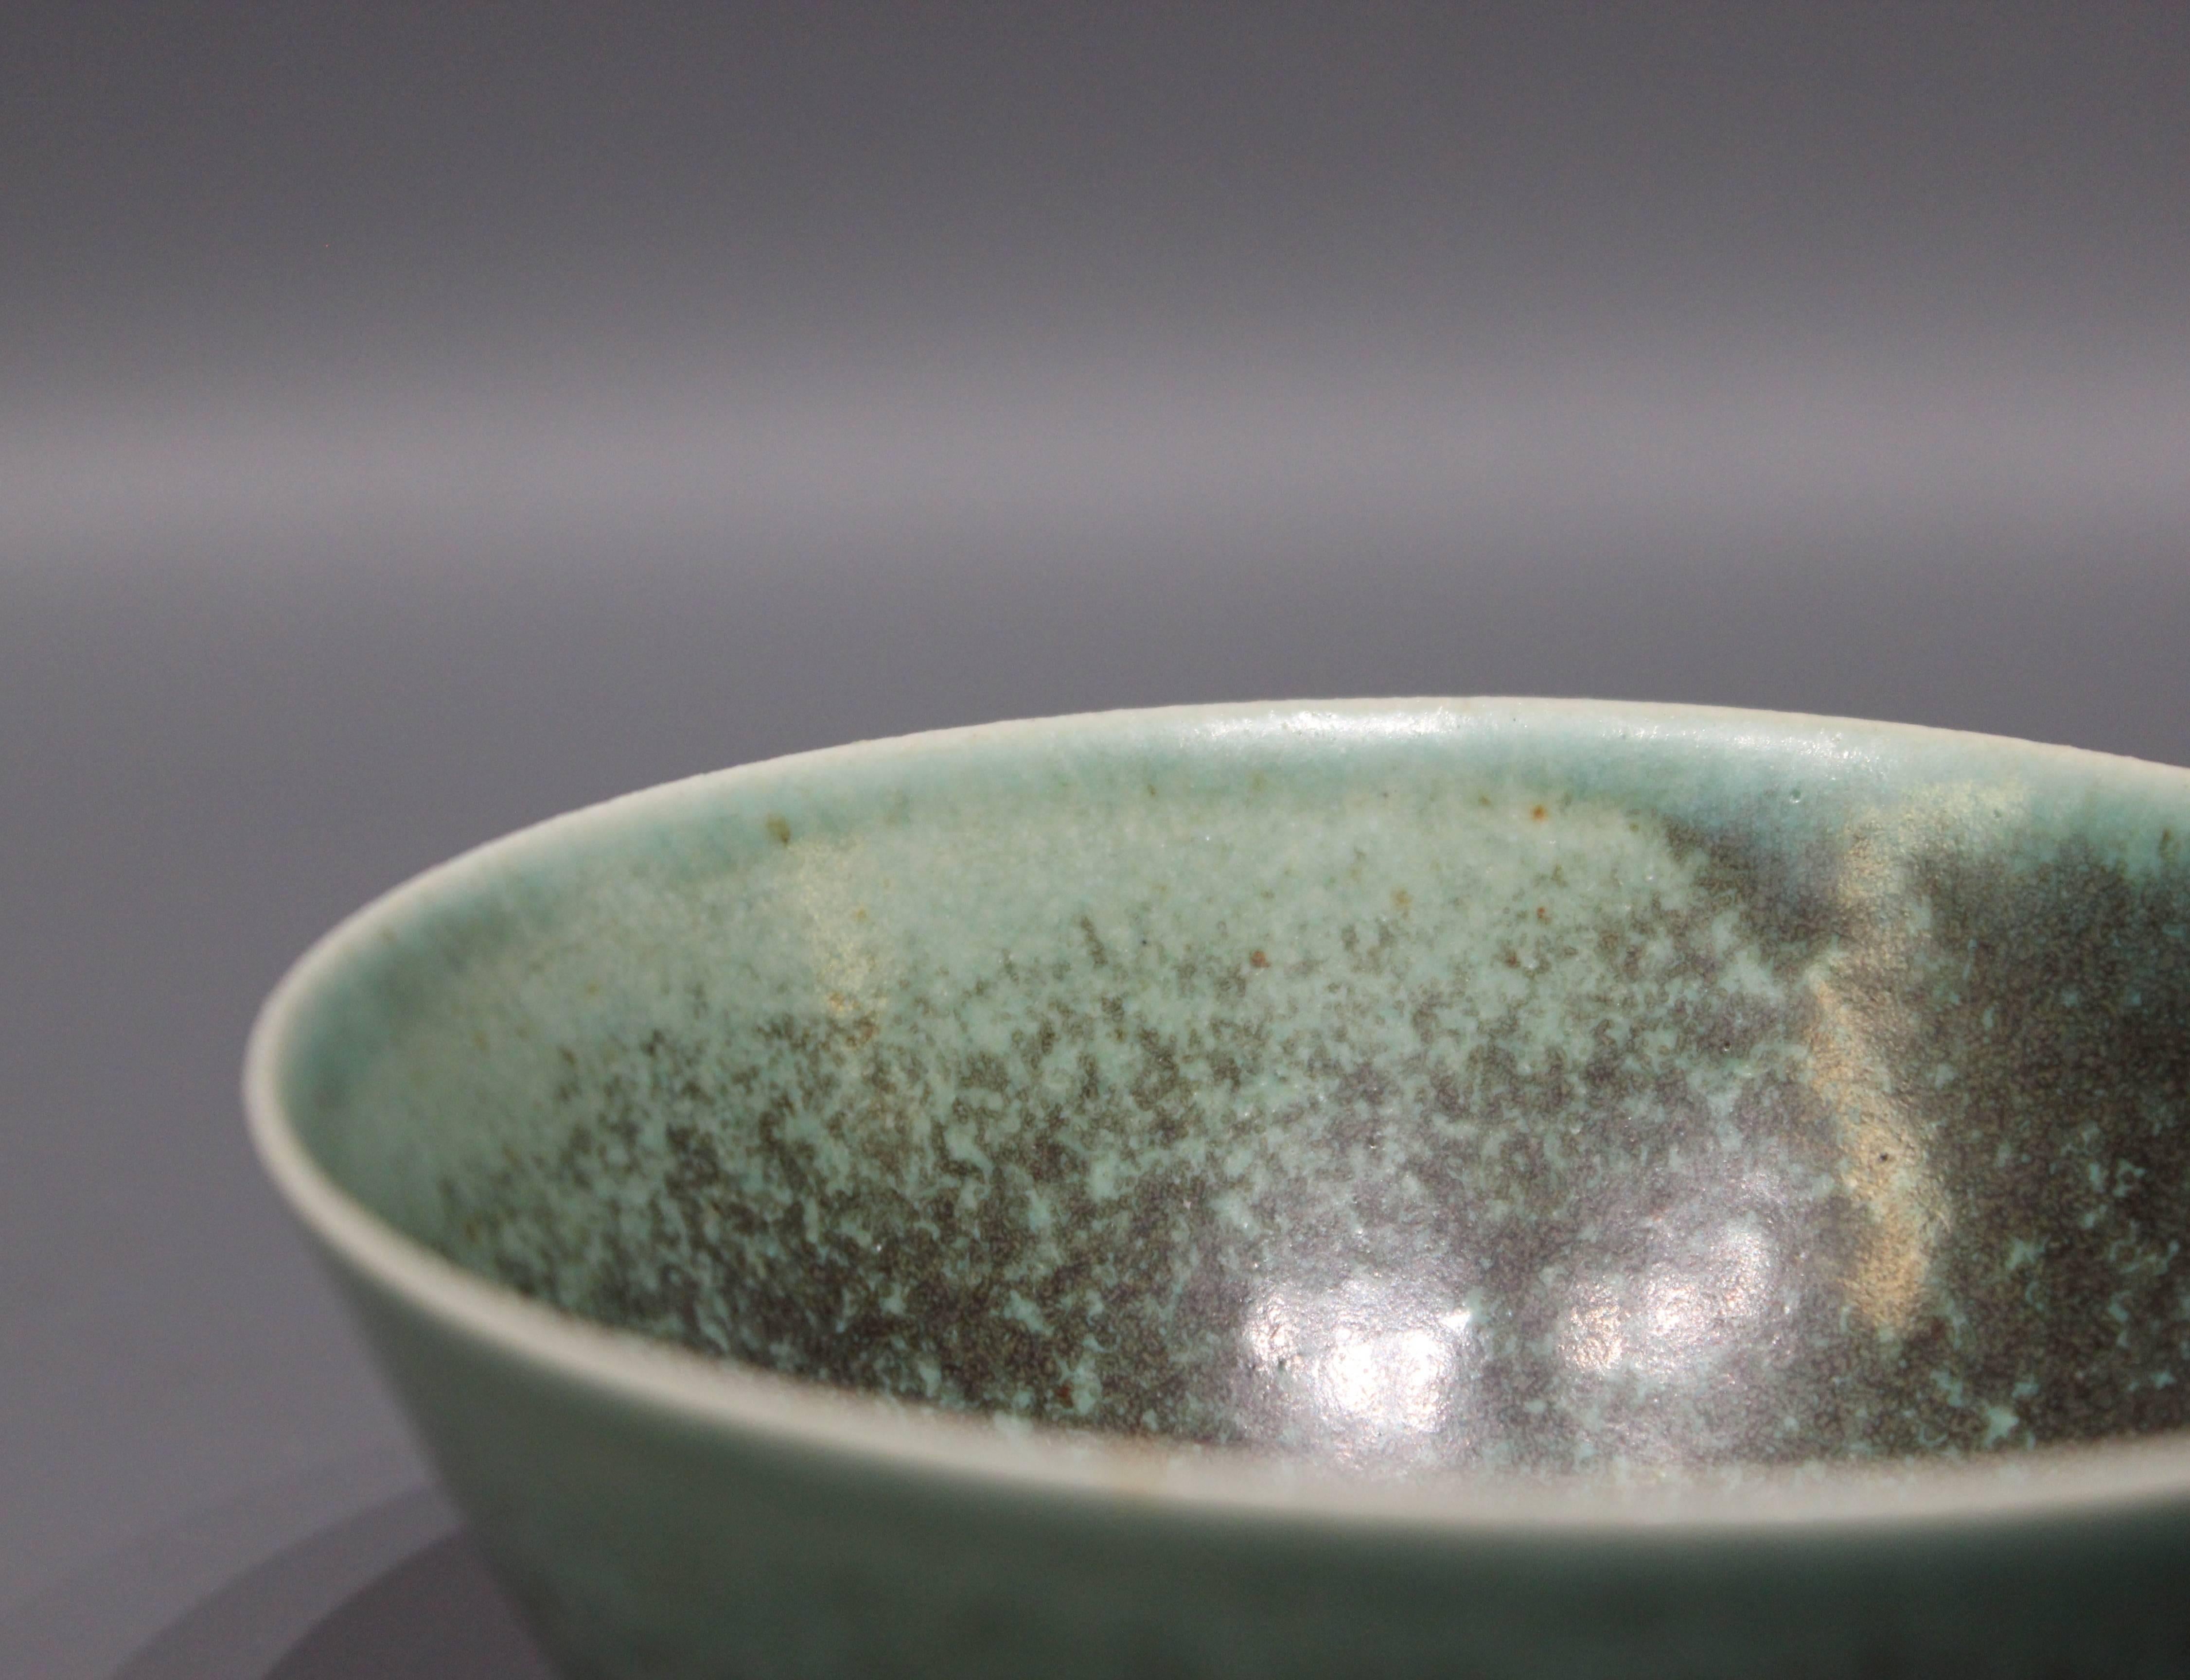 Scandinavian Modern Ceramic Bowl with a Light Green/Turquoise Glaze, No.: 3 by Saxbo